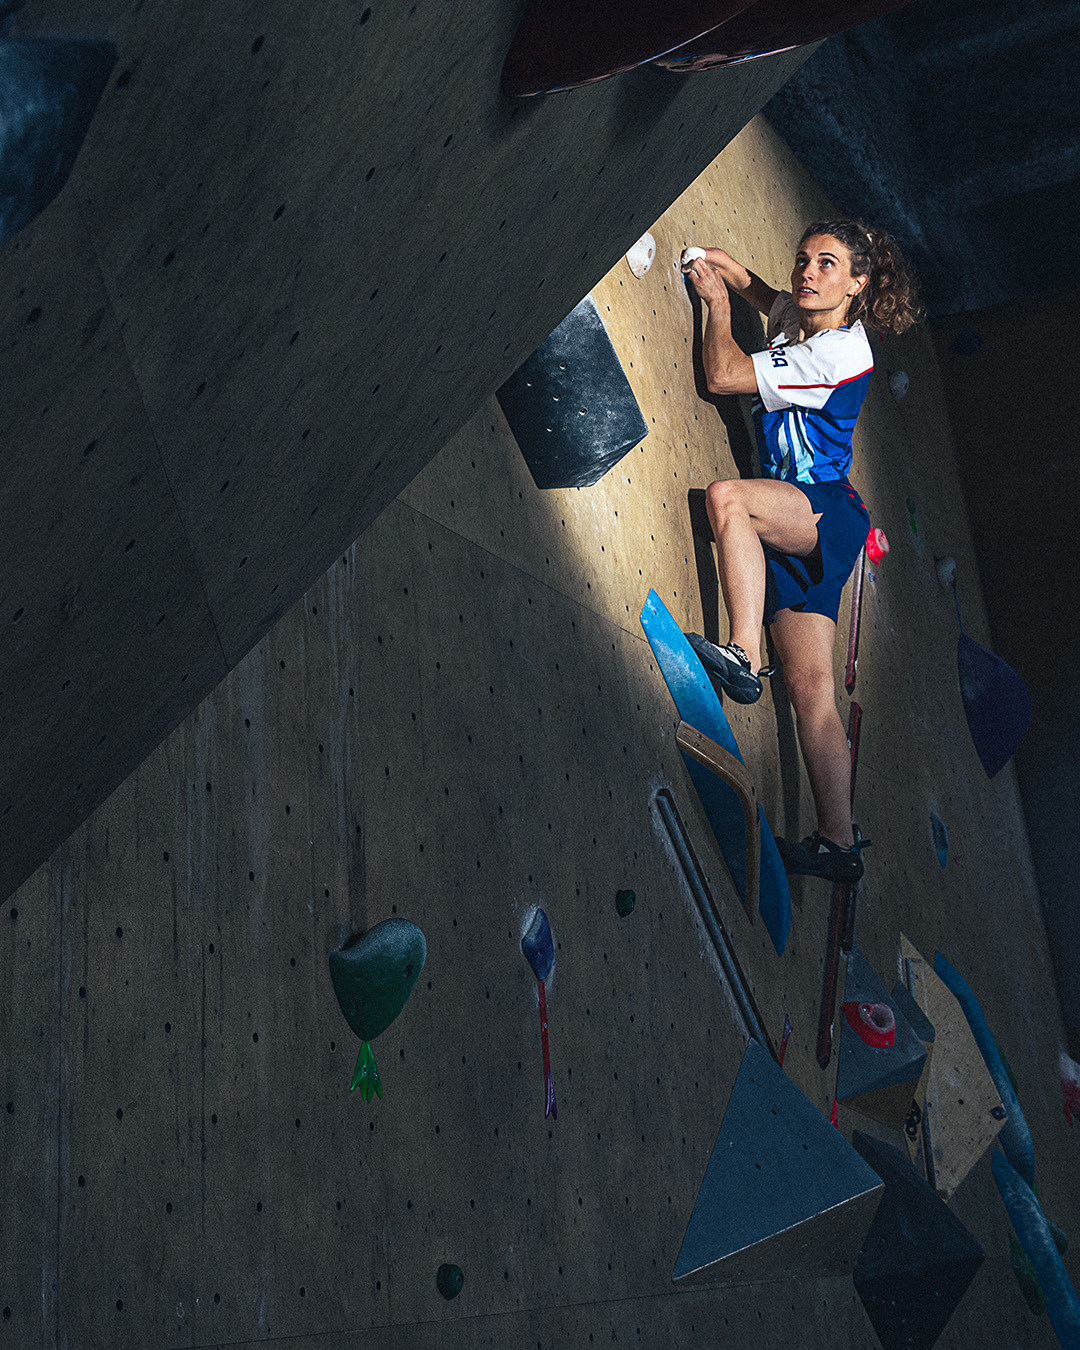 Athlete climbing an indoor rock wall in a competition setting